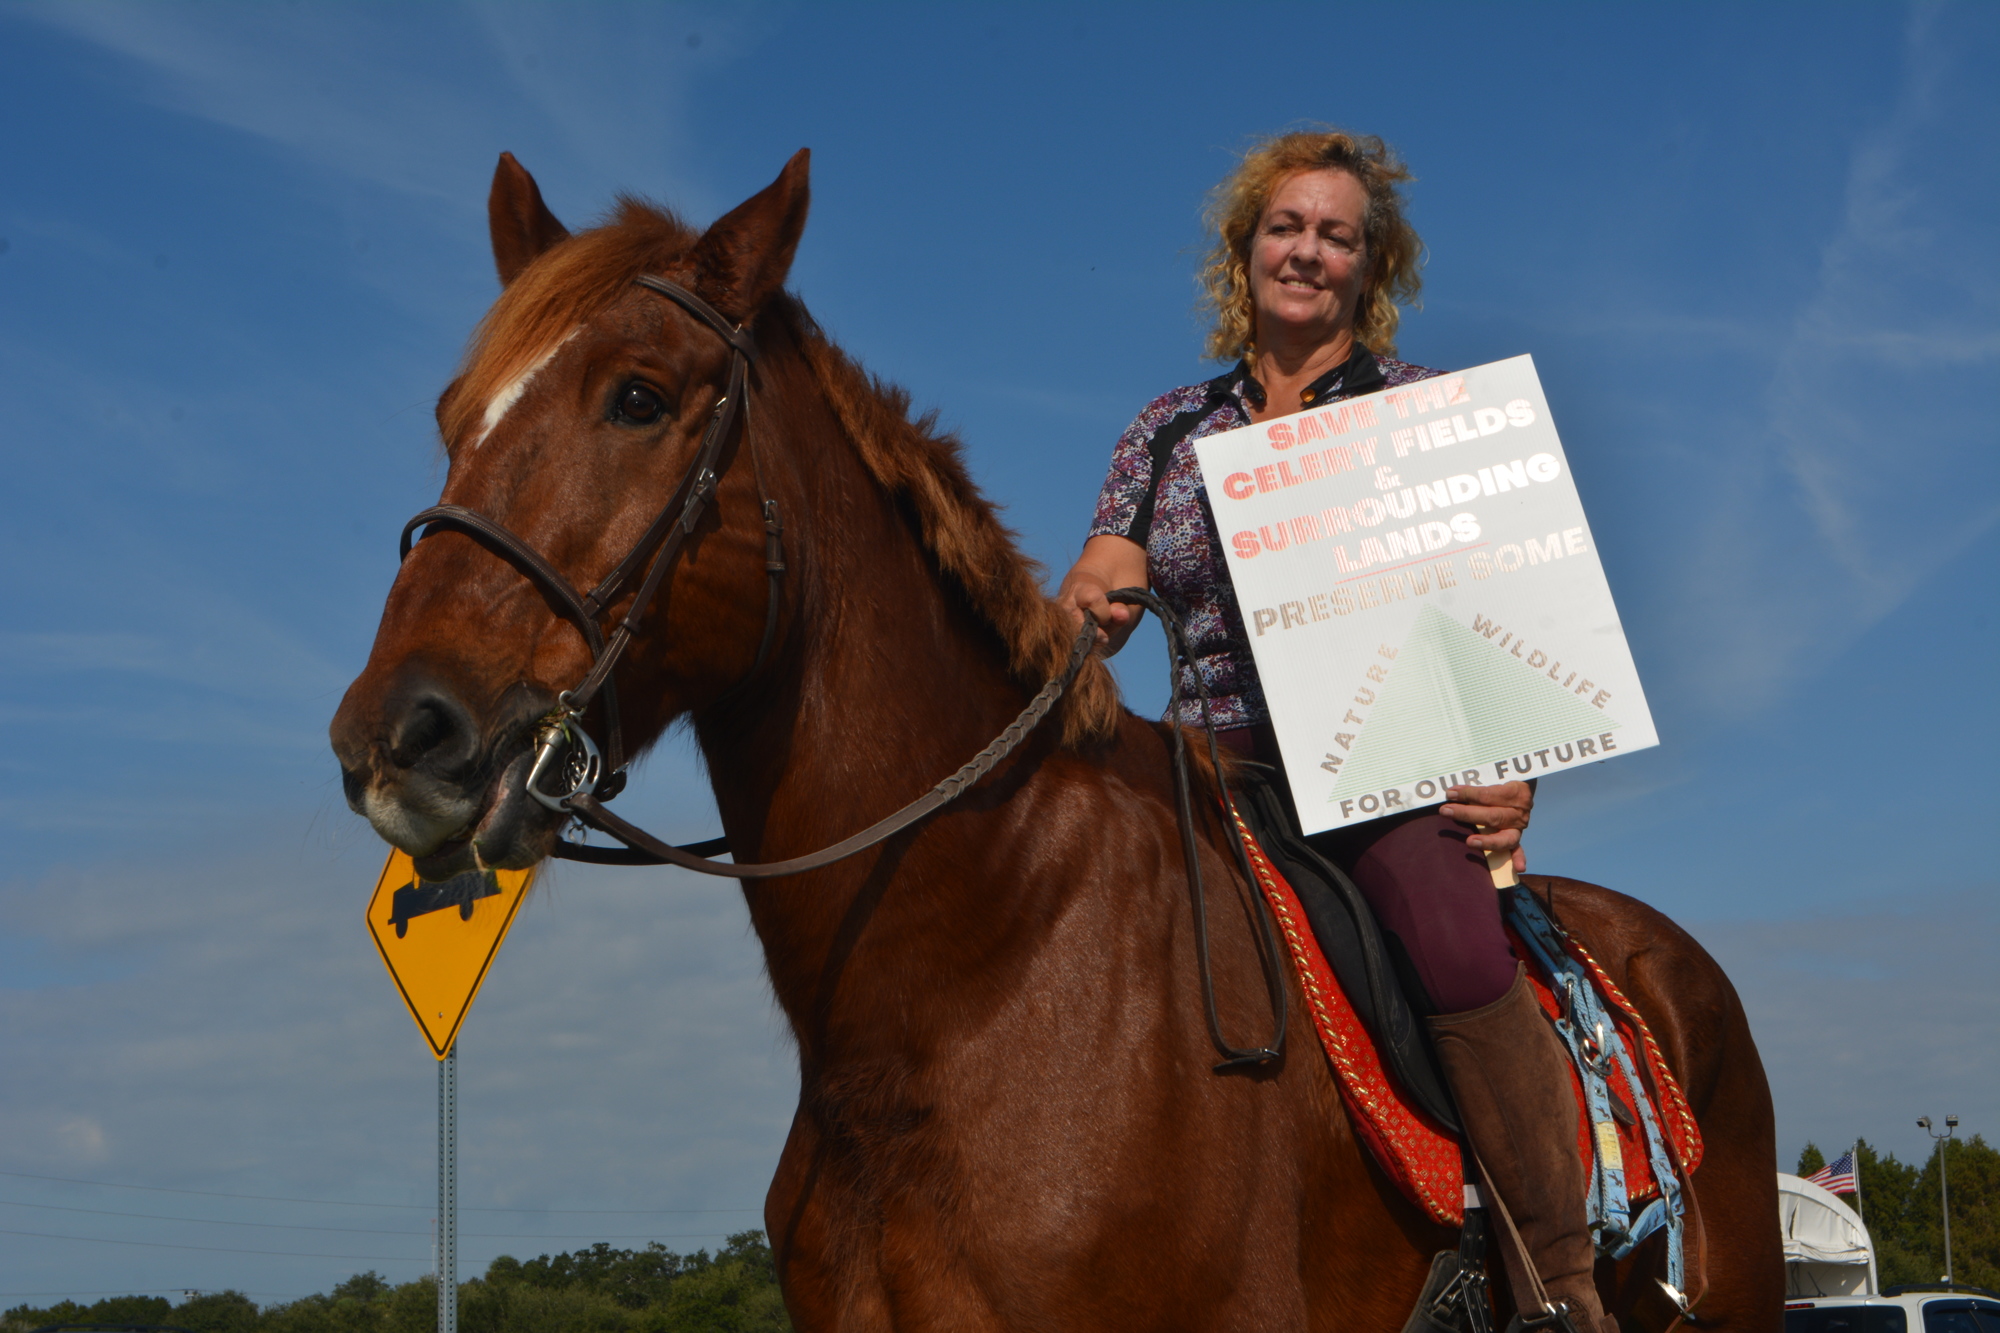 Ellian Rosaire protests atop her horse, Officer Red, in an effort to save the Quads from development. Rosaire is the owner of nearby Rosaire’s Riding Academy & Pony Rides, which uses the Quads regularly.